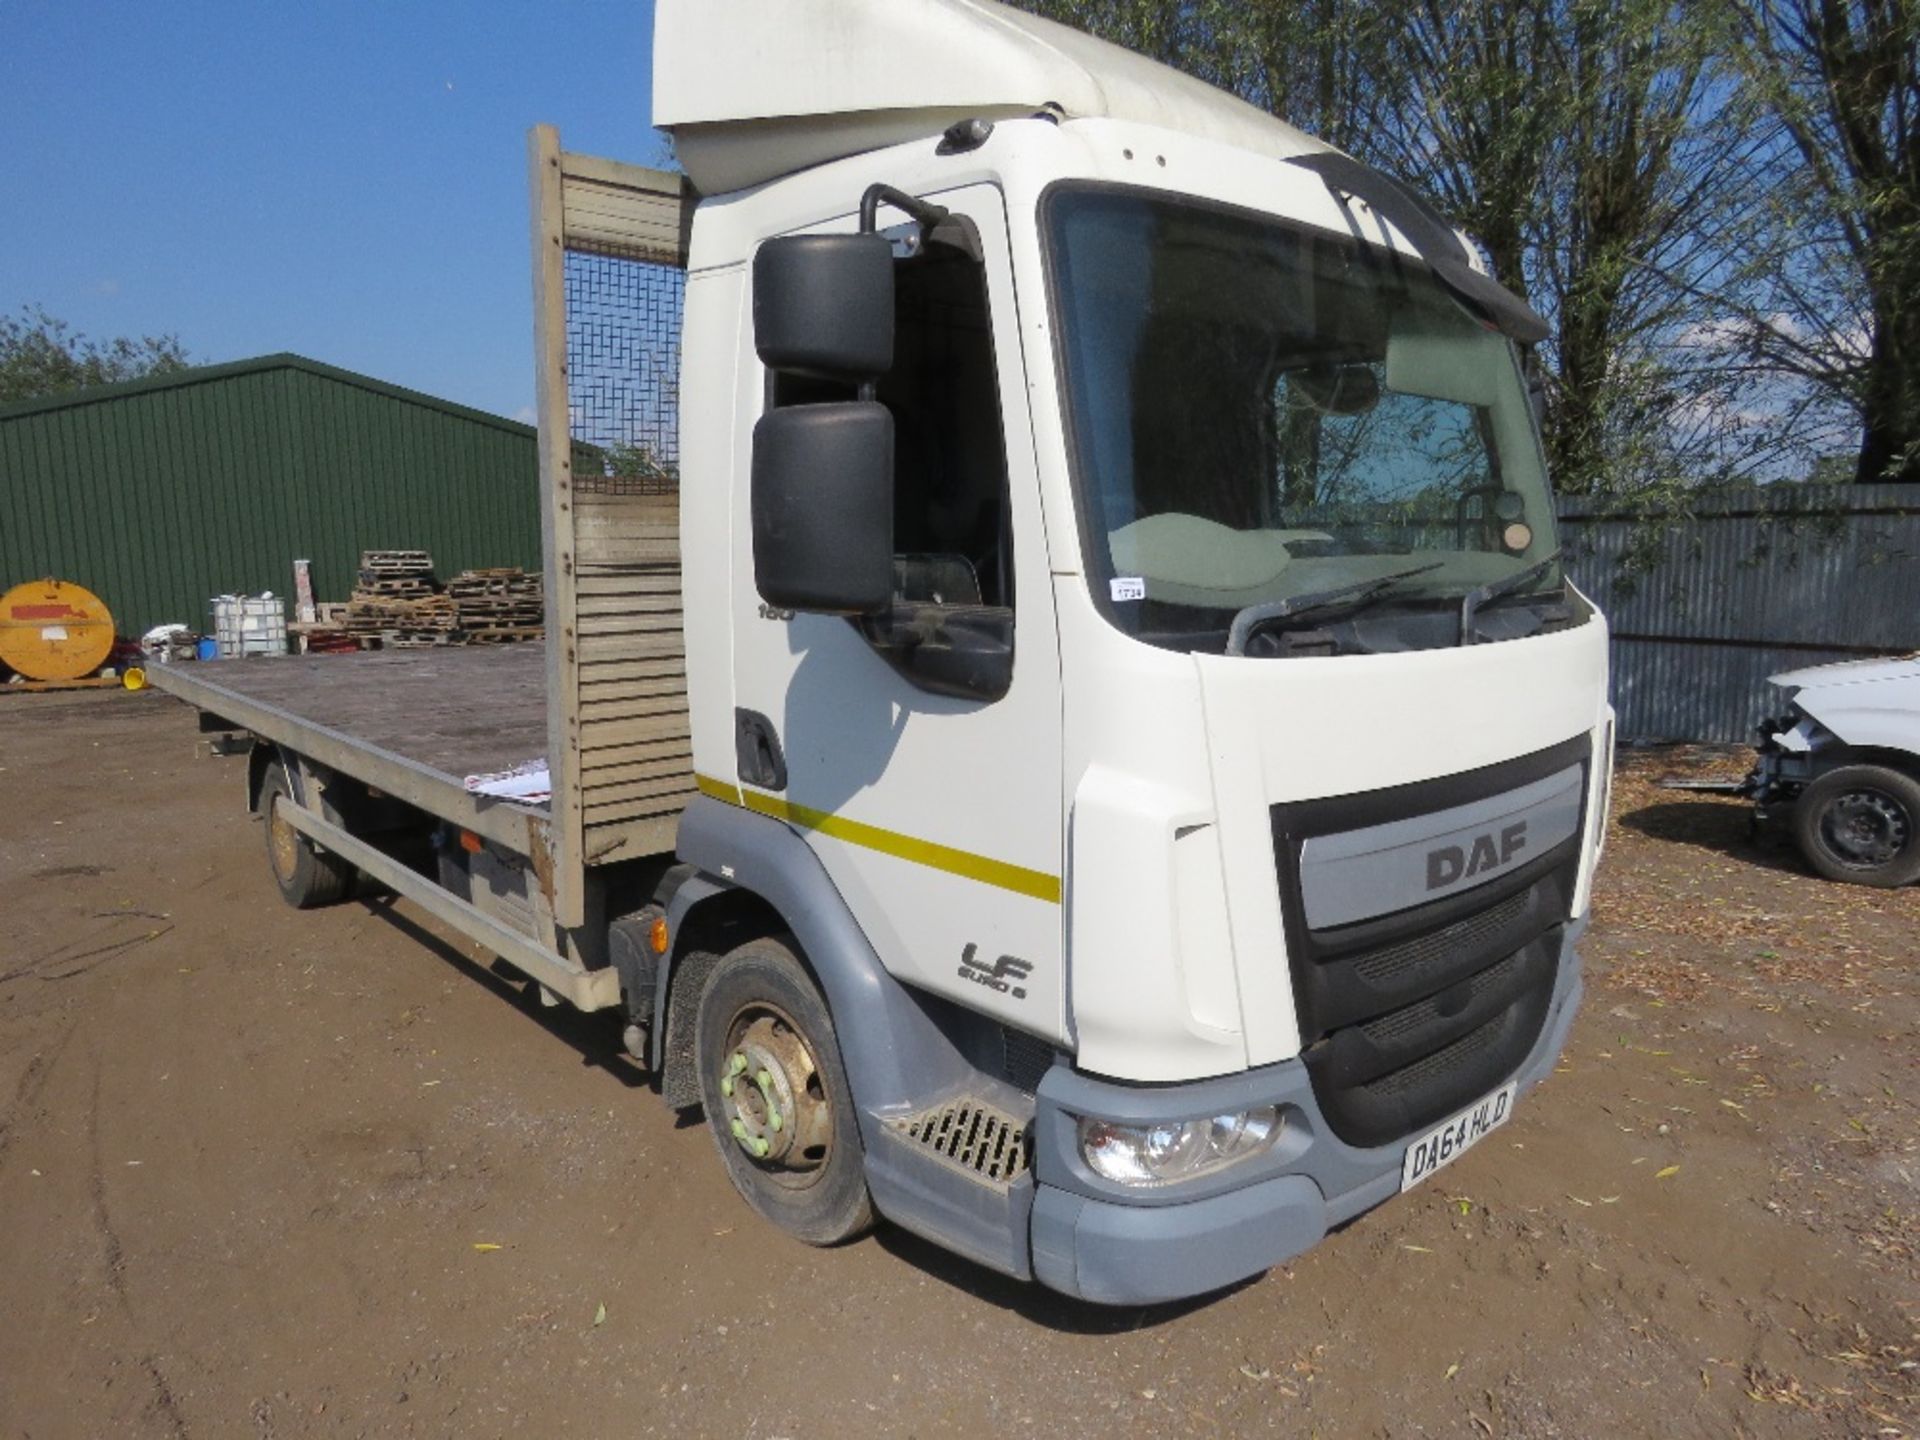 DAF LF180 FLAT BED LORRY REG:DA64 HLD. EURO 6. 7500KG RATED. AUTO GEARBOX. SOURCED FROM COMPANY LIQU